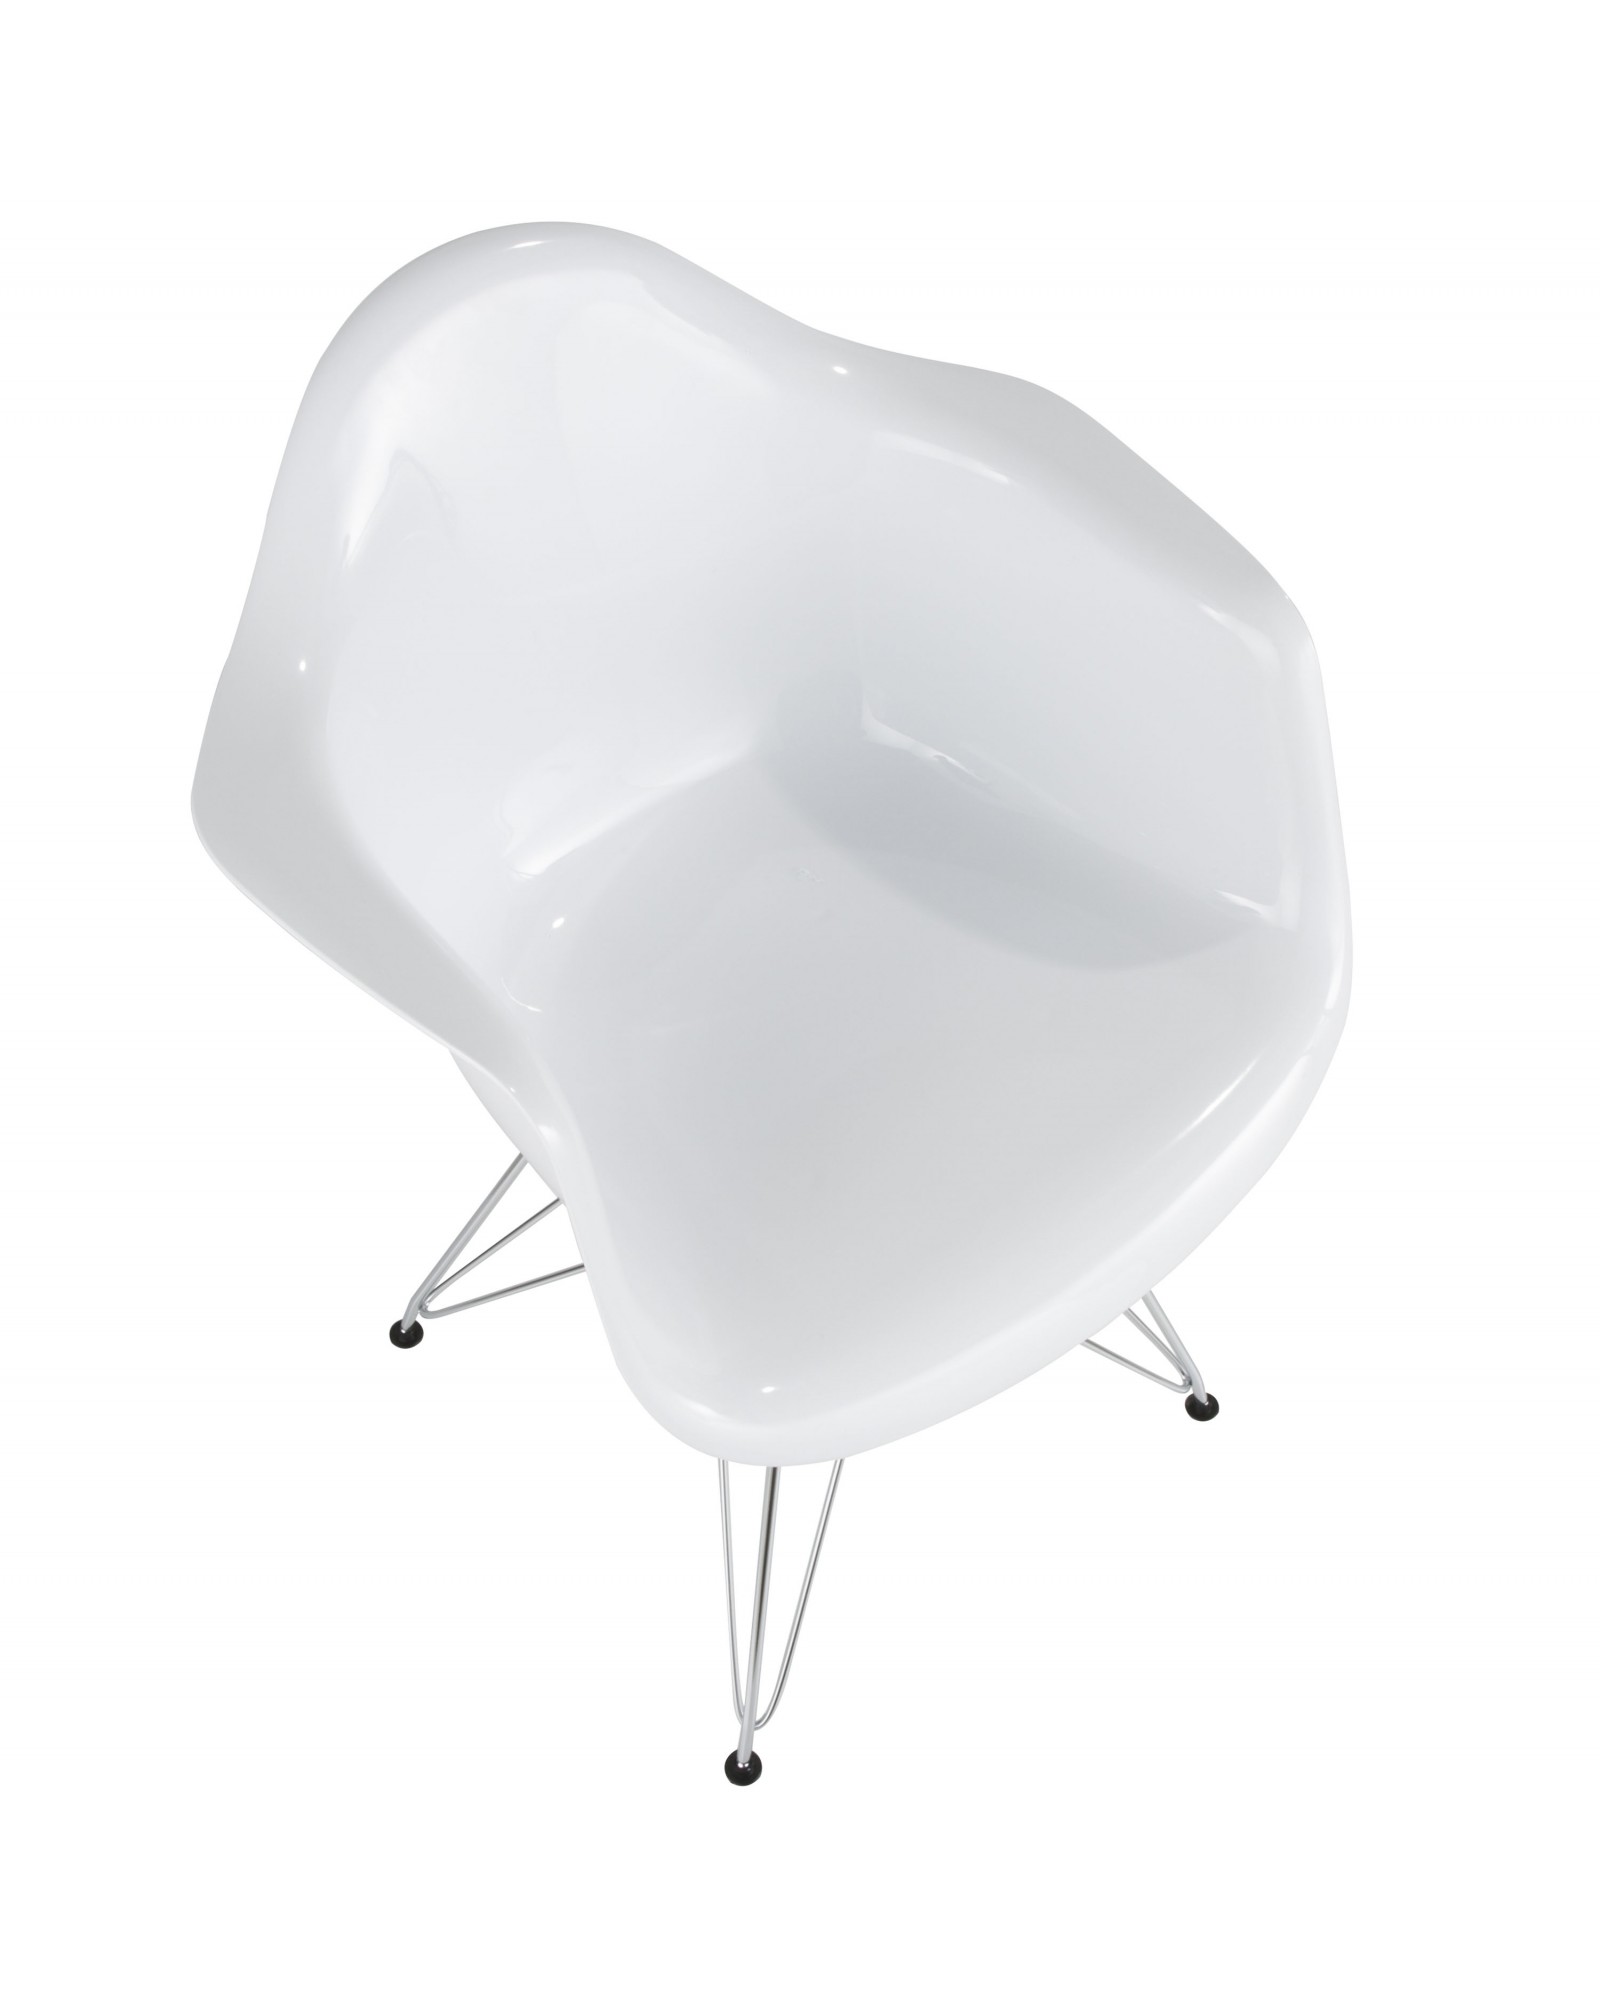 Neo Flair Contemporary Dining/Accent Chair in White and Chrome